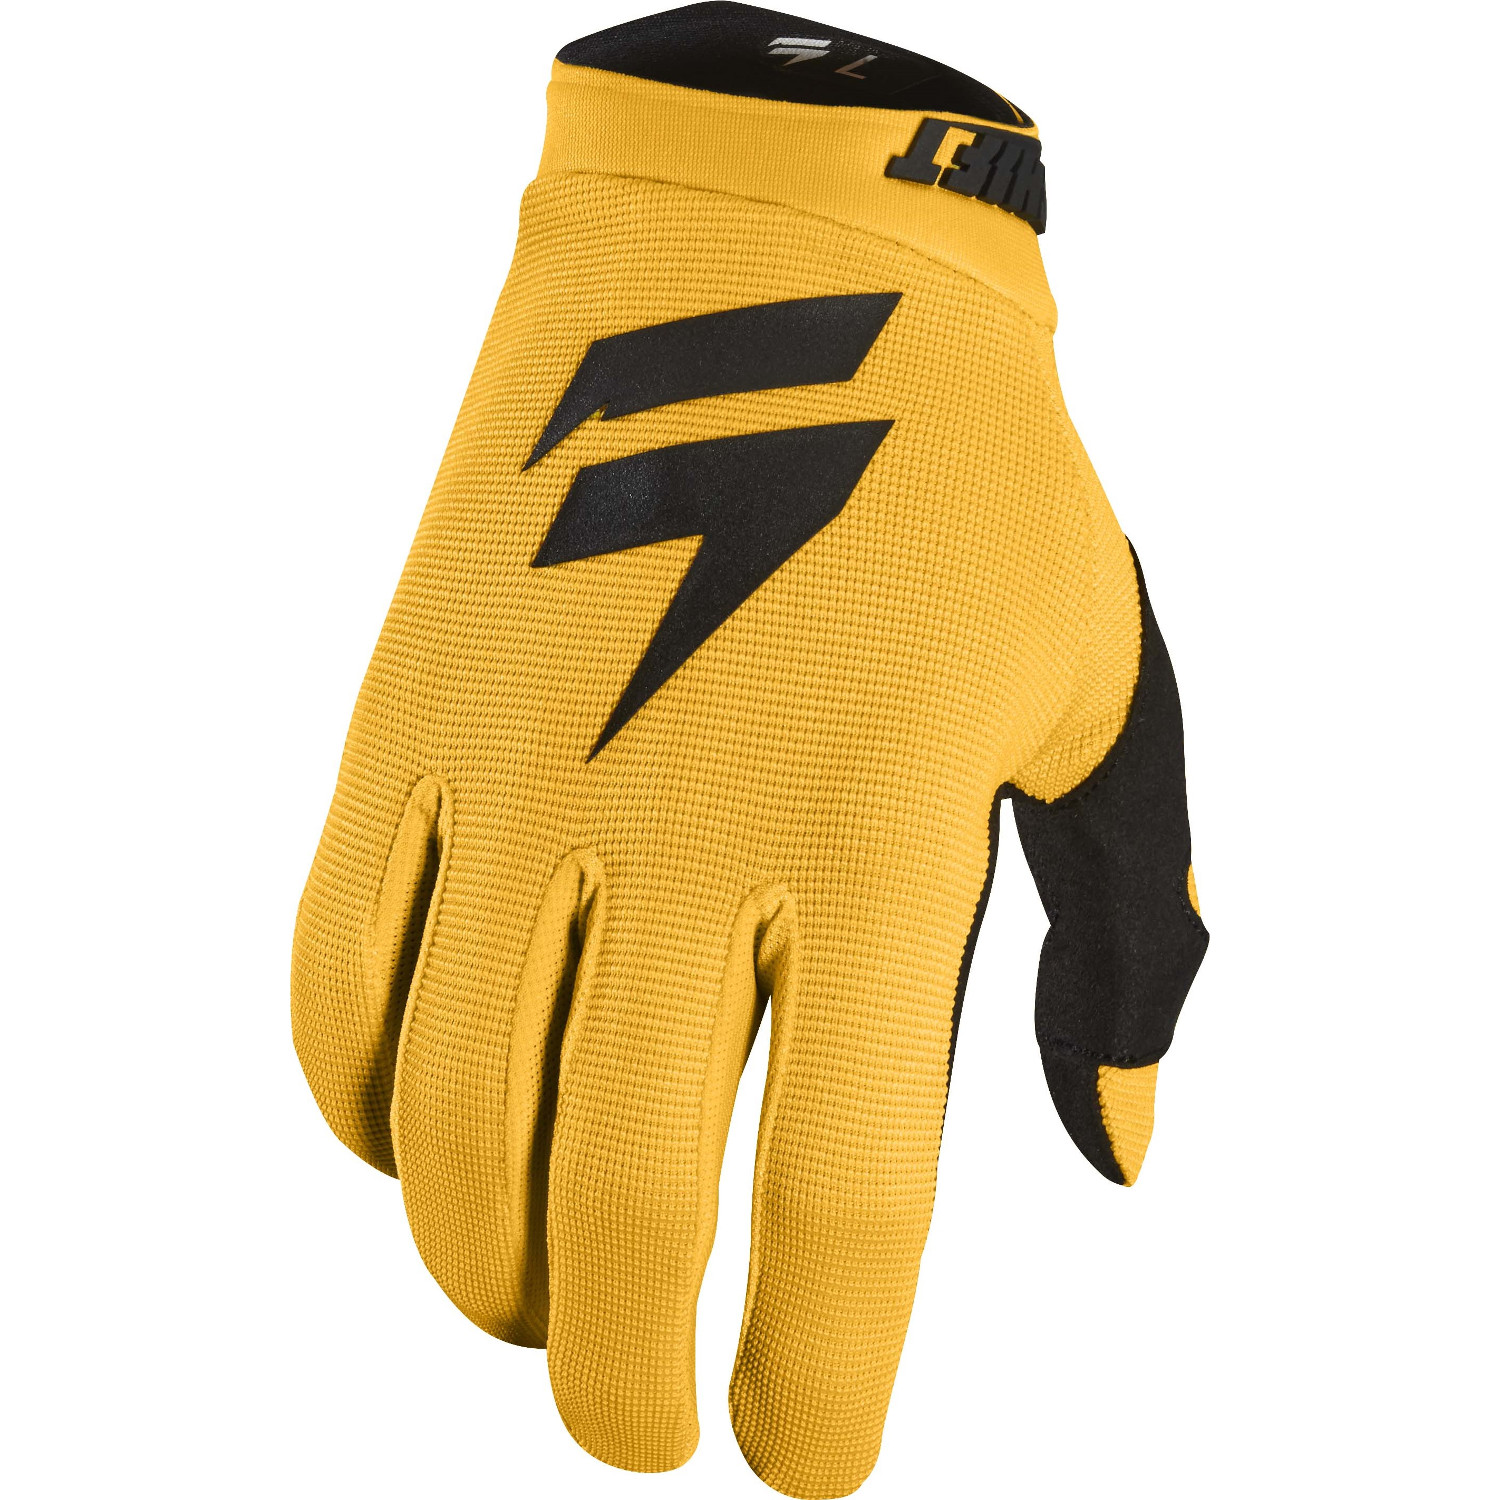 Shift Gloves Whit3 Air Yellow